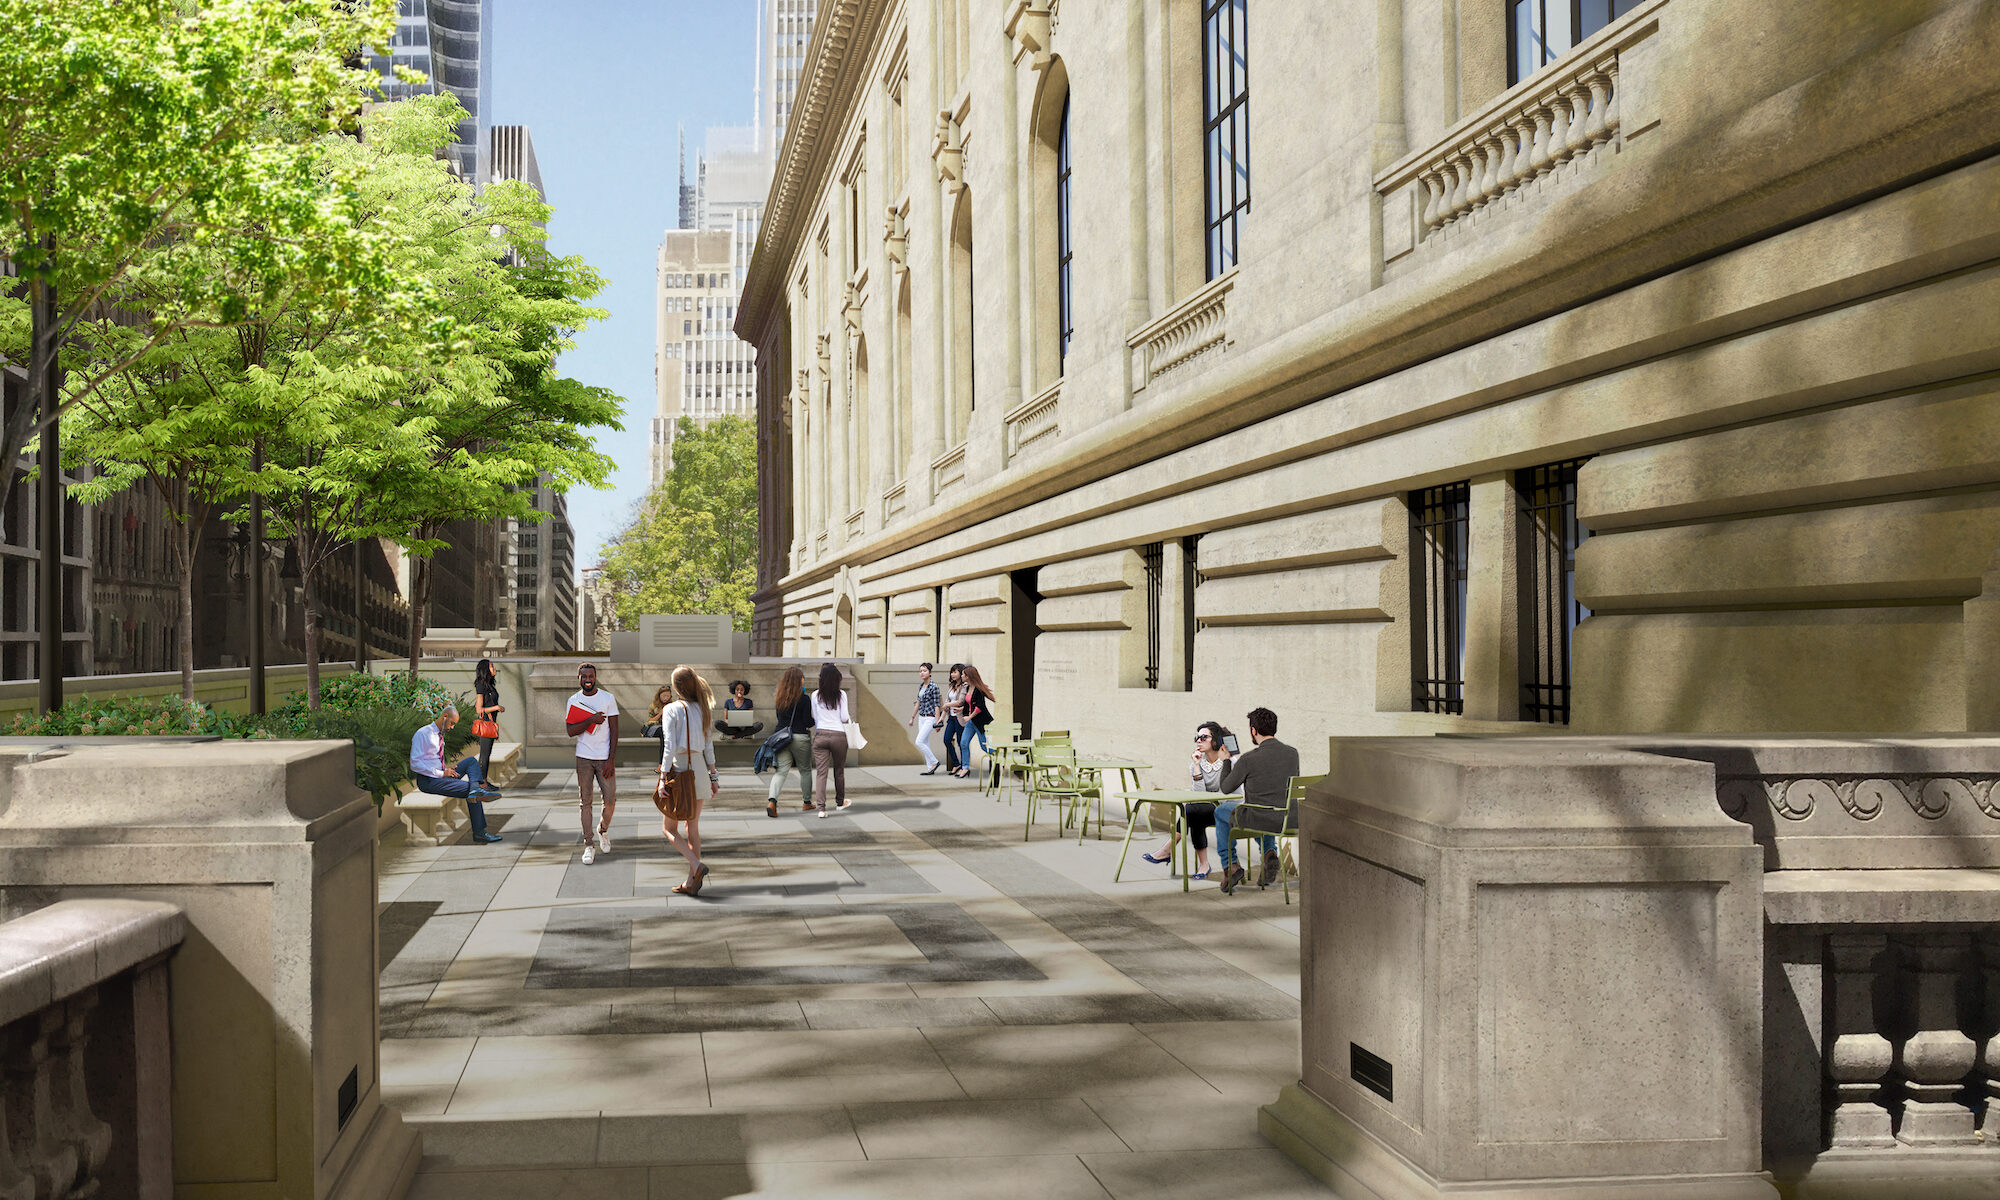 Rendering of the Stephen A. Schwarzman Building near the 40th Street entrance, showing a courtyard filled with people